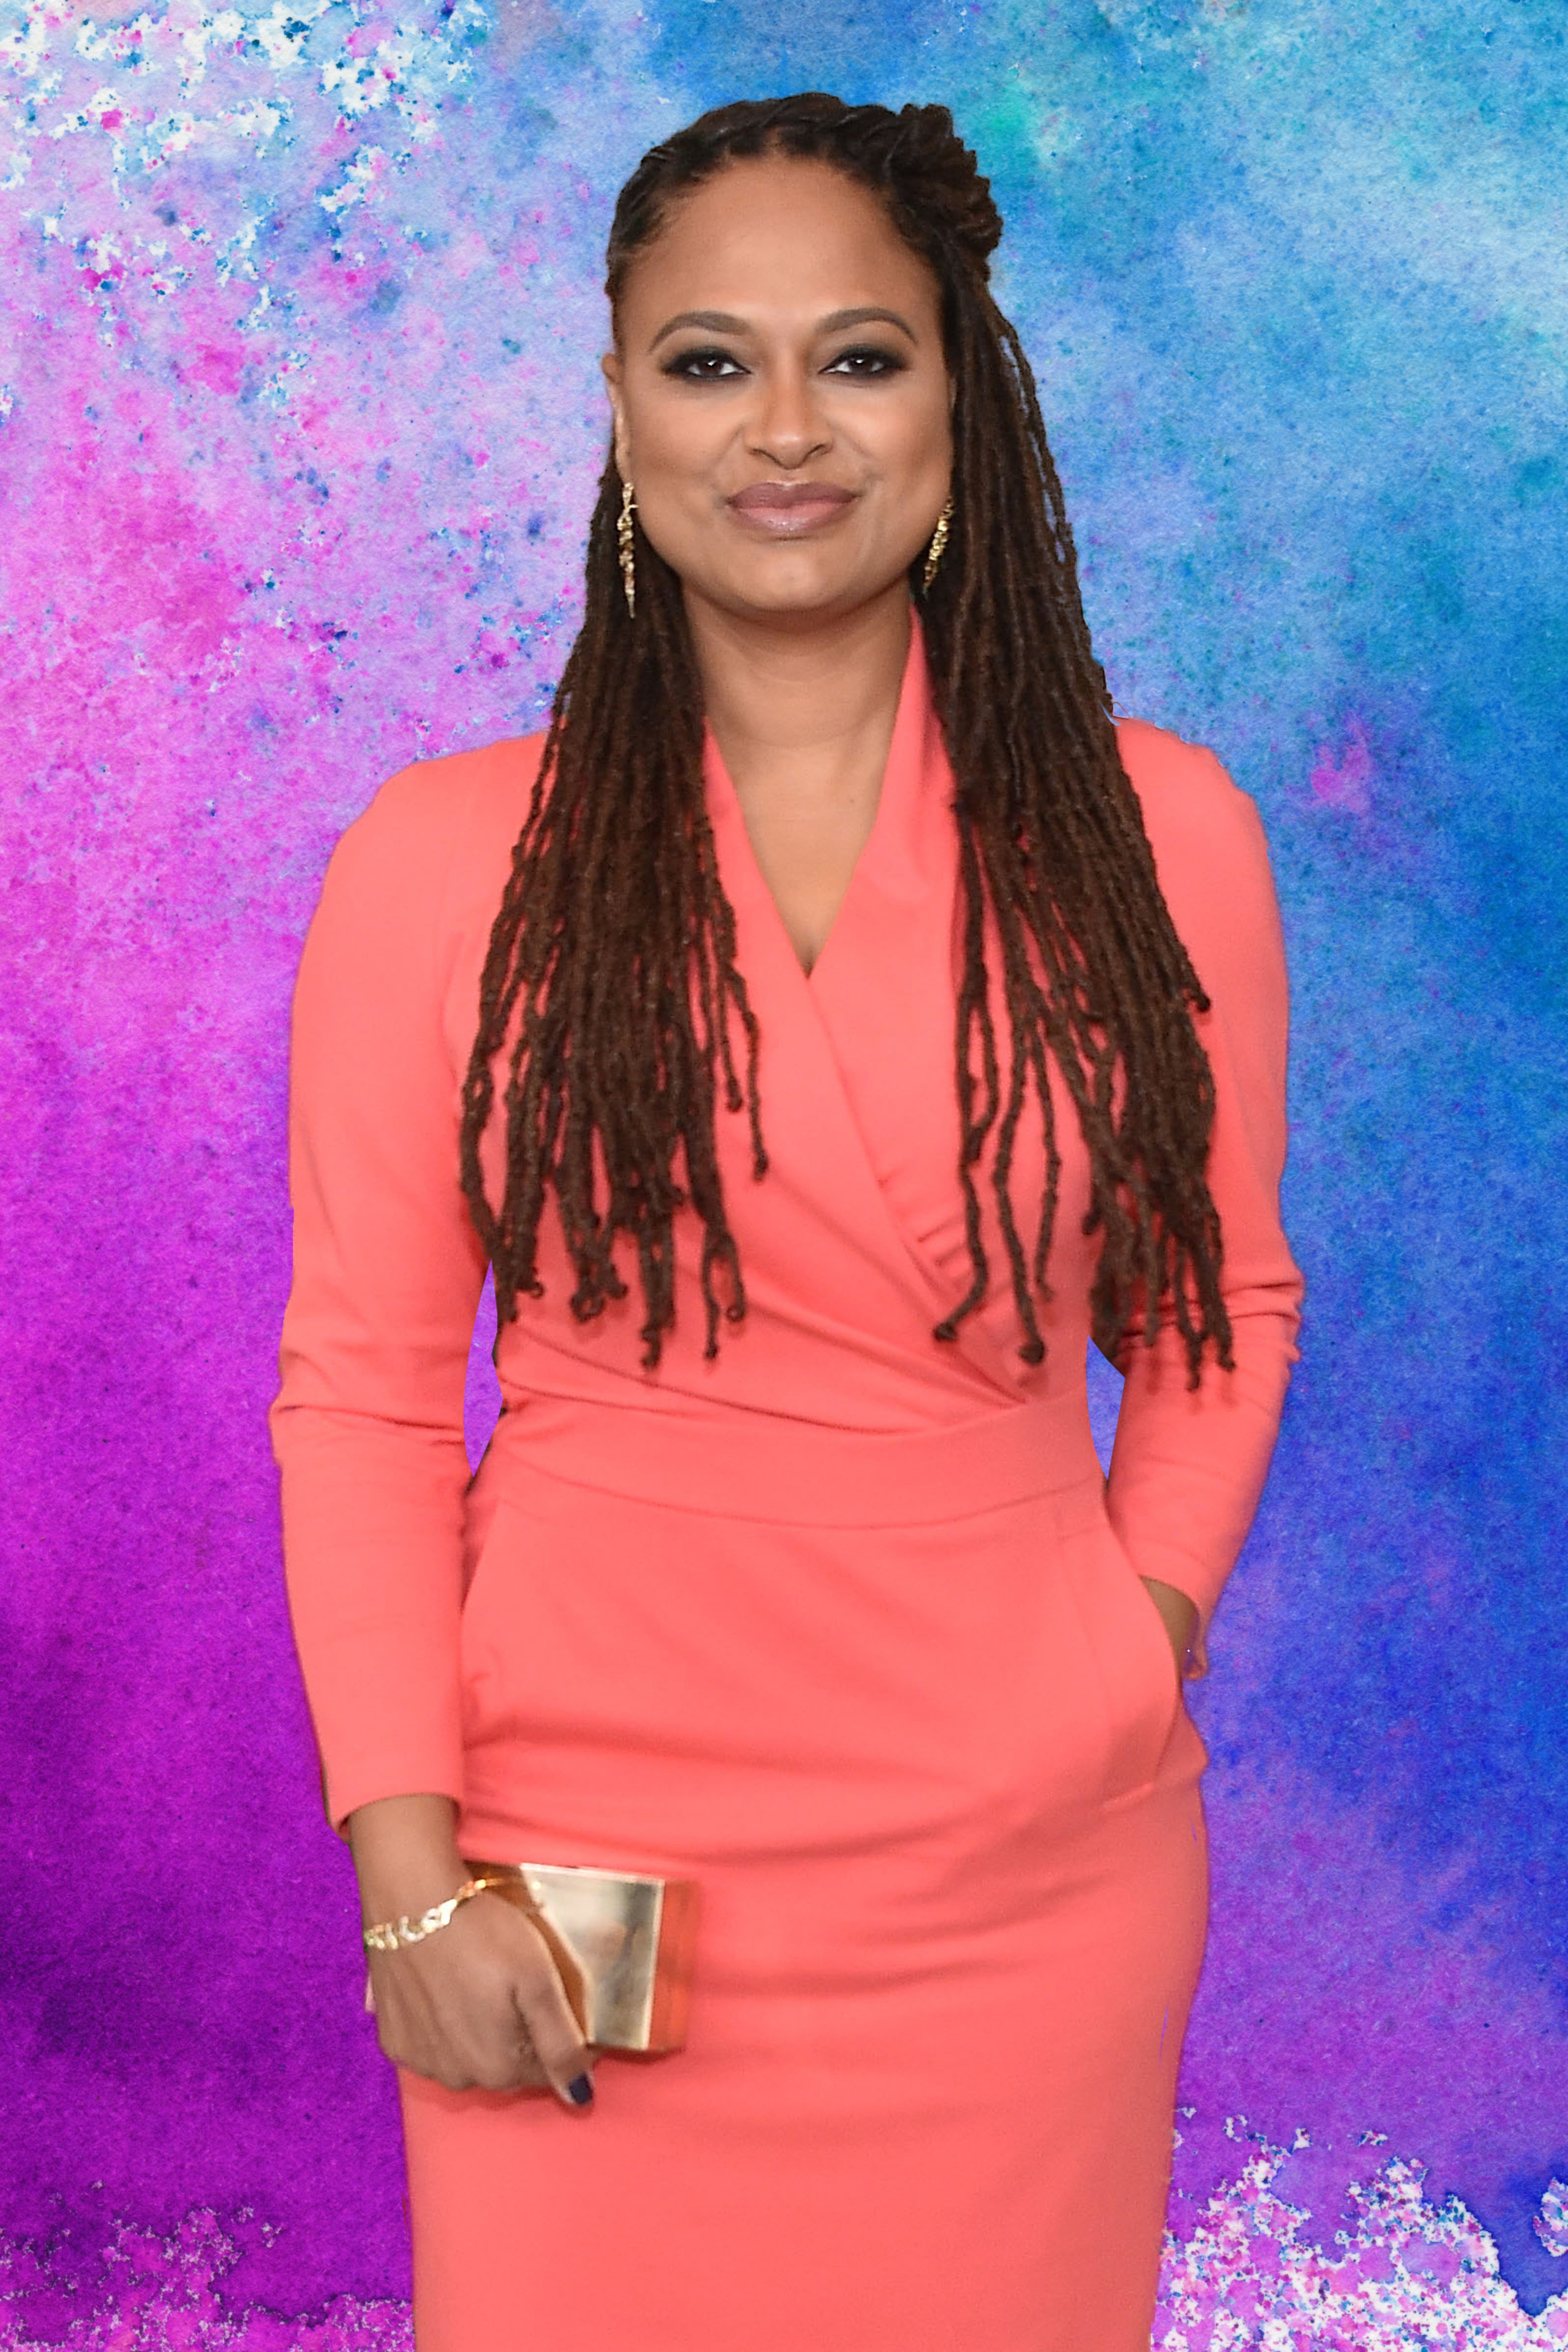 Ava DuVernay On Black Women Directors: "There's A Short Window For Me In The Business"
